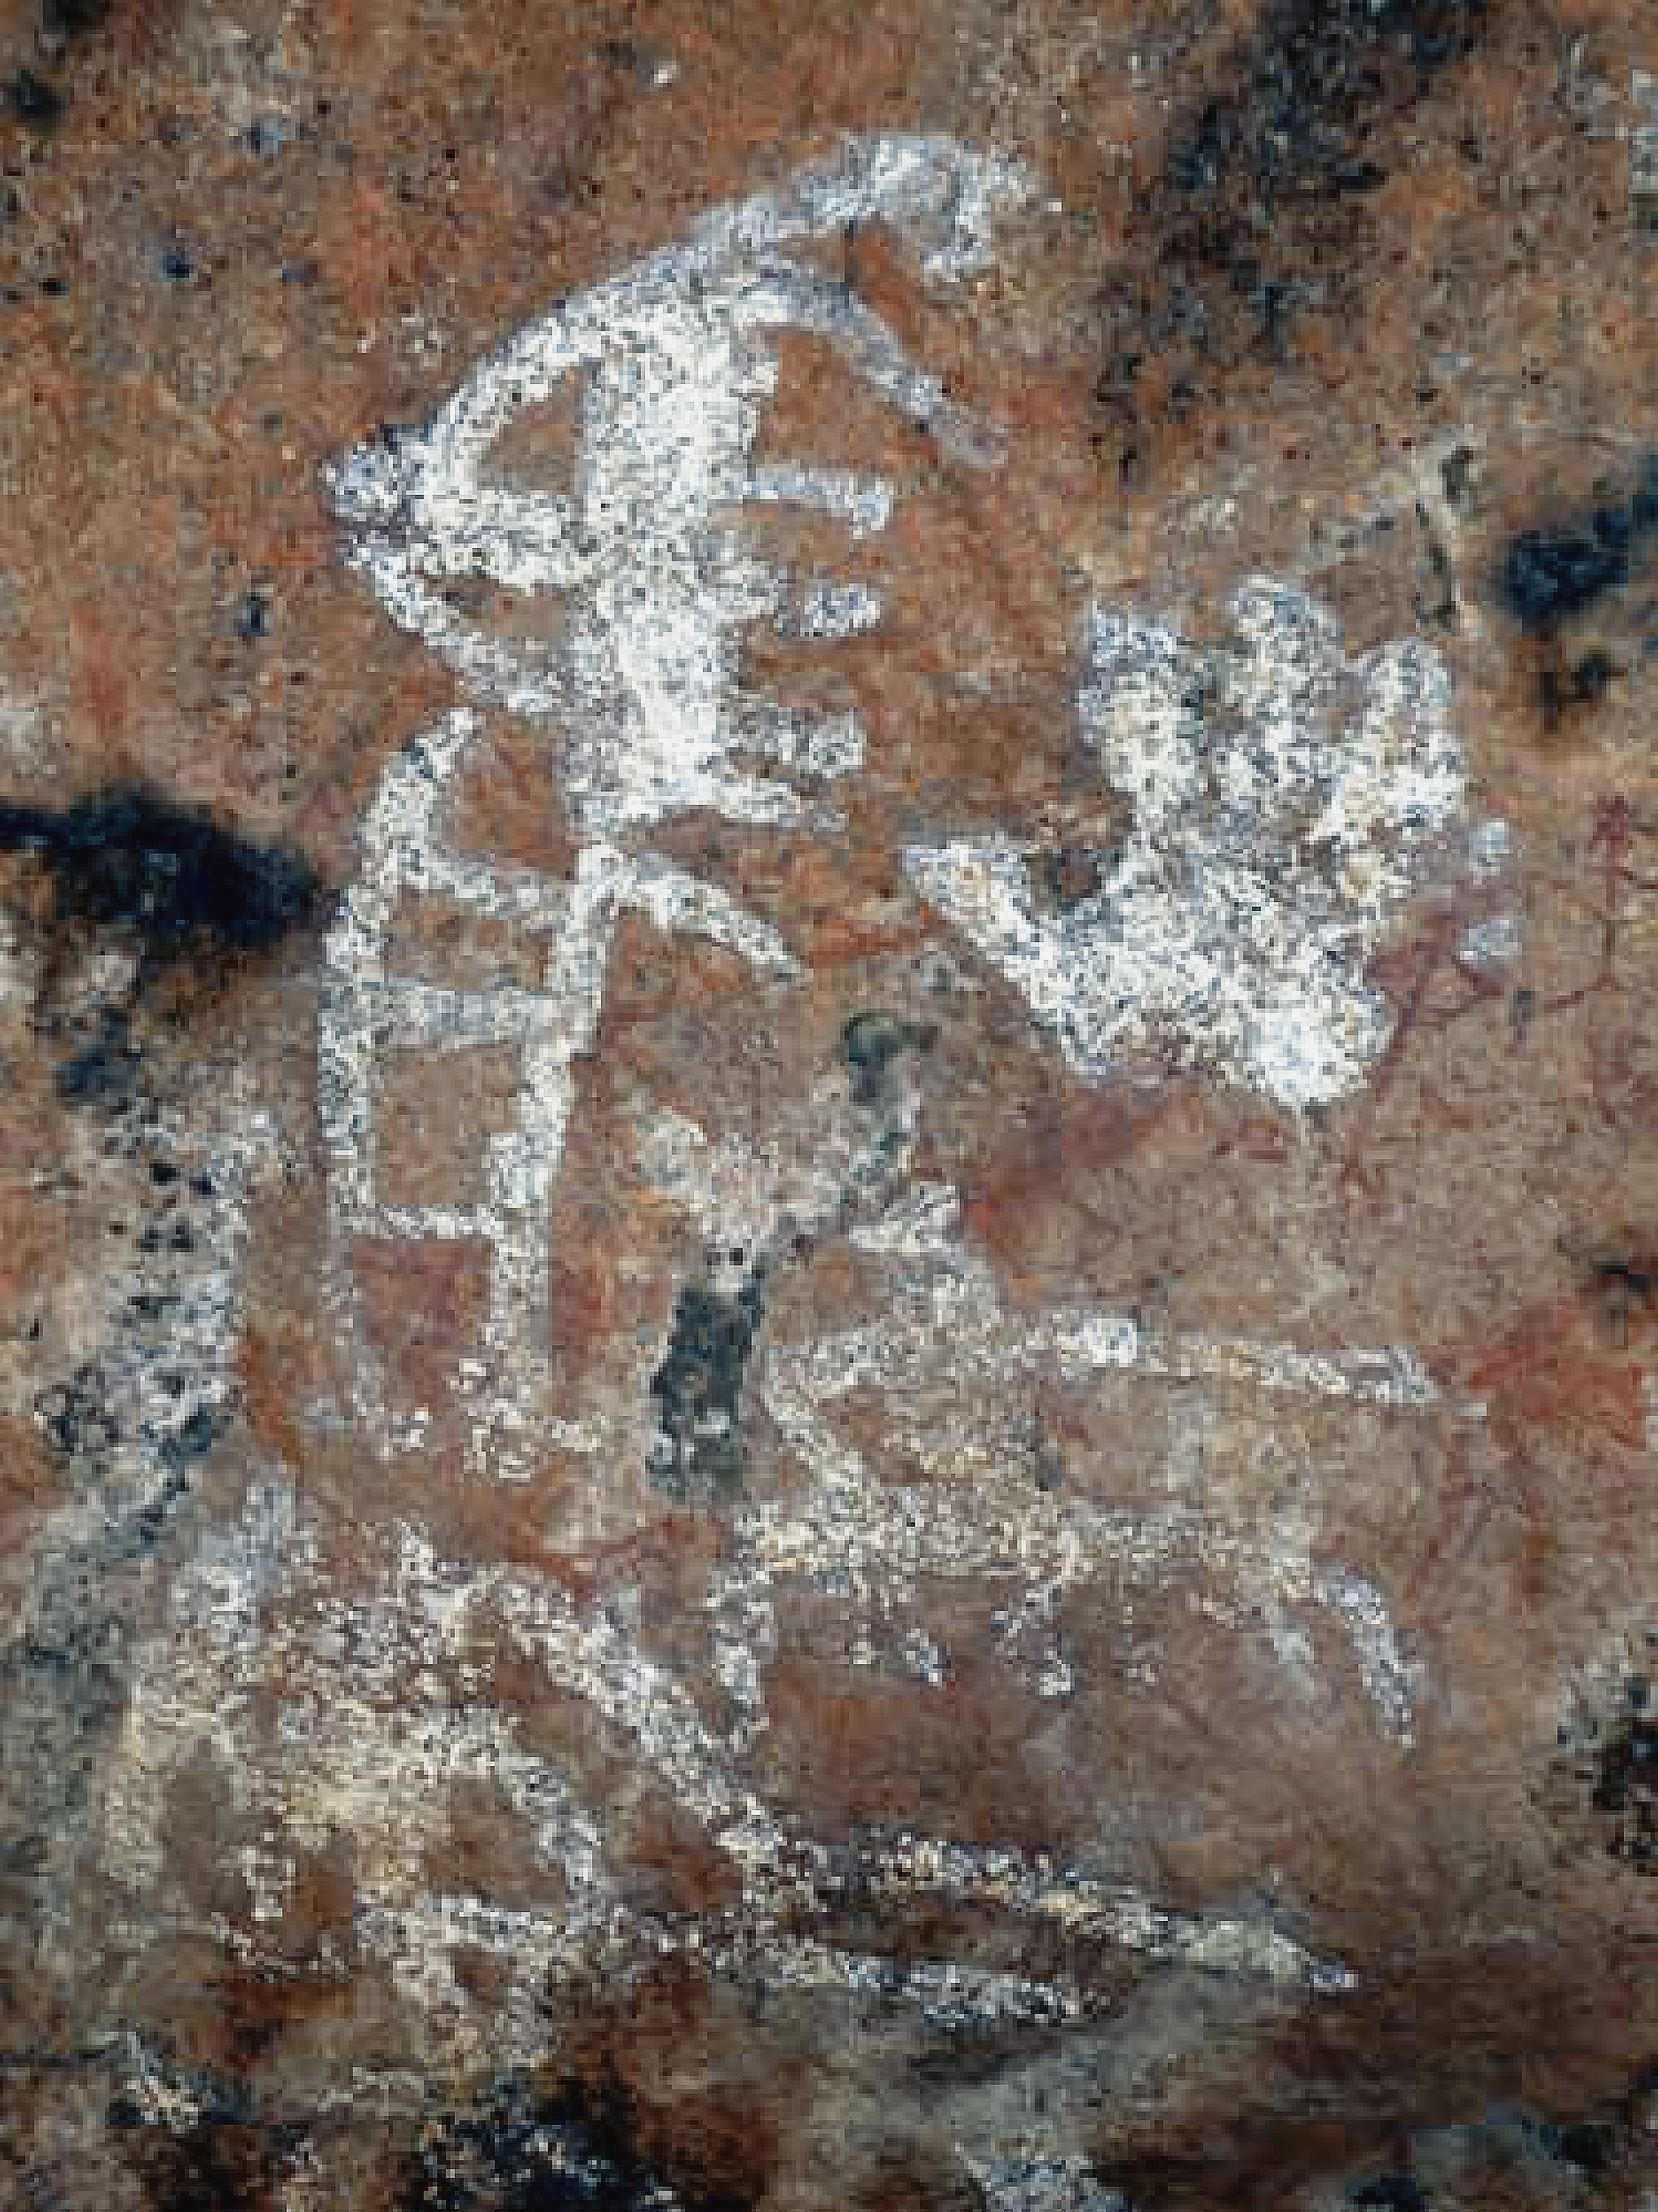 White handprint recently found in the unpublished Jaldafy site of the Pachmarhi area Madhya Pradesh